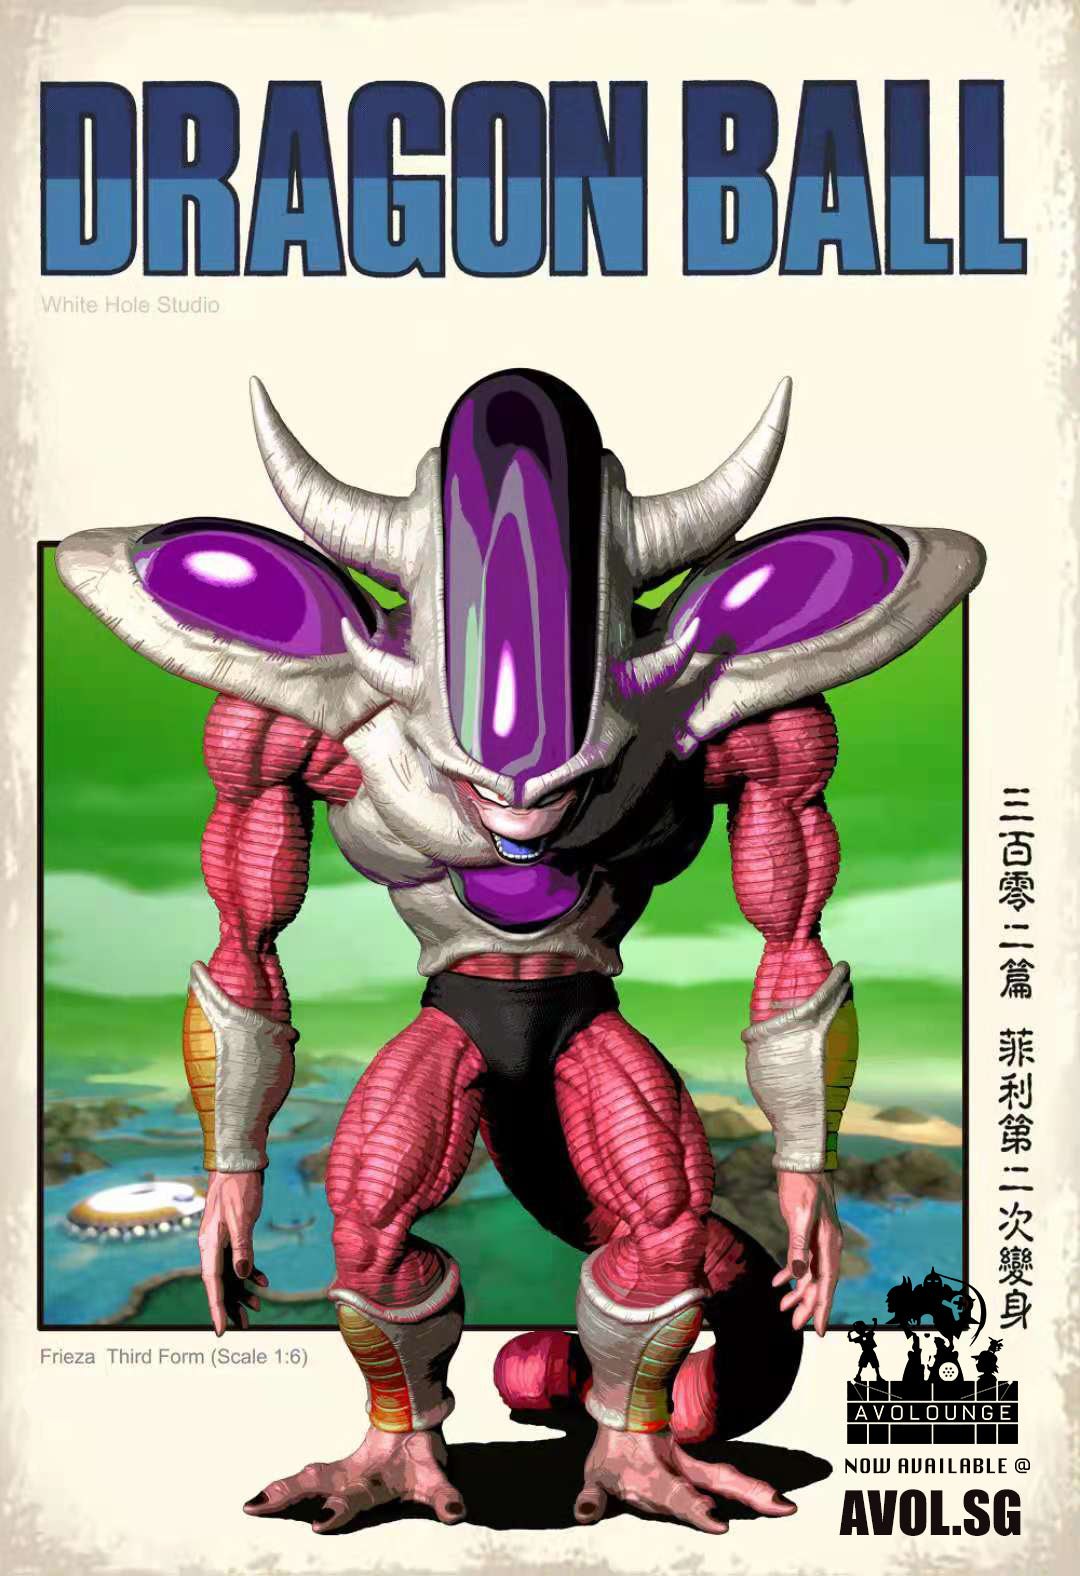 Frieza 3rd Form